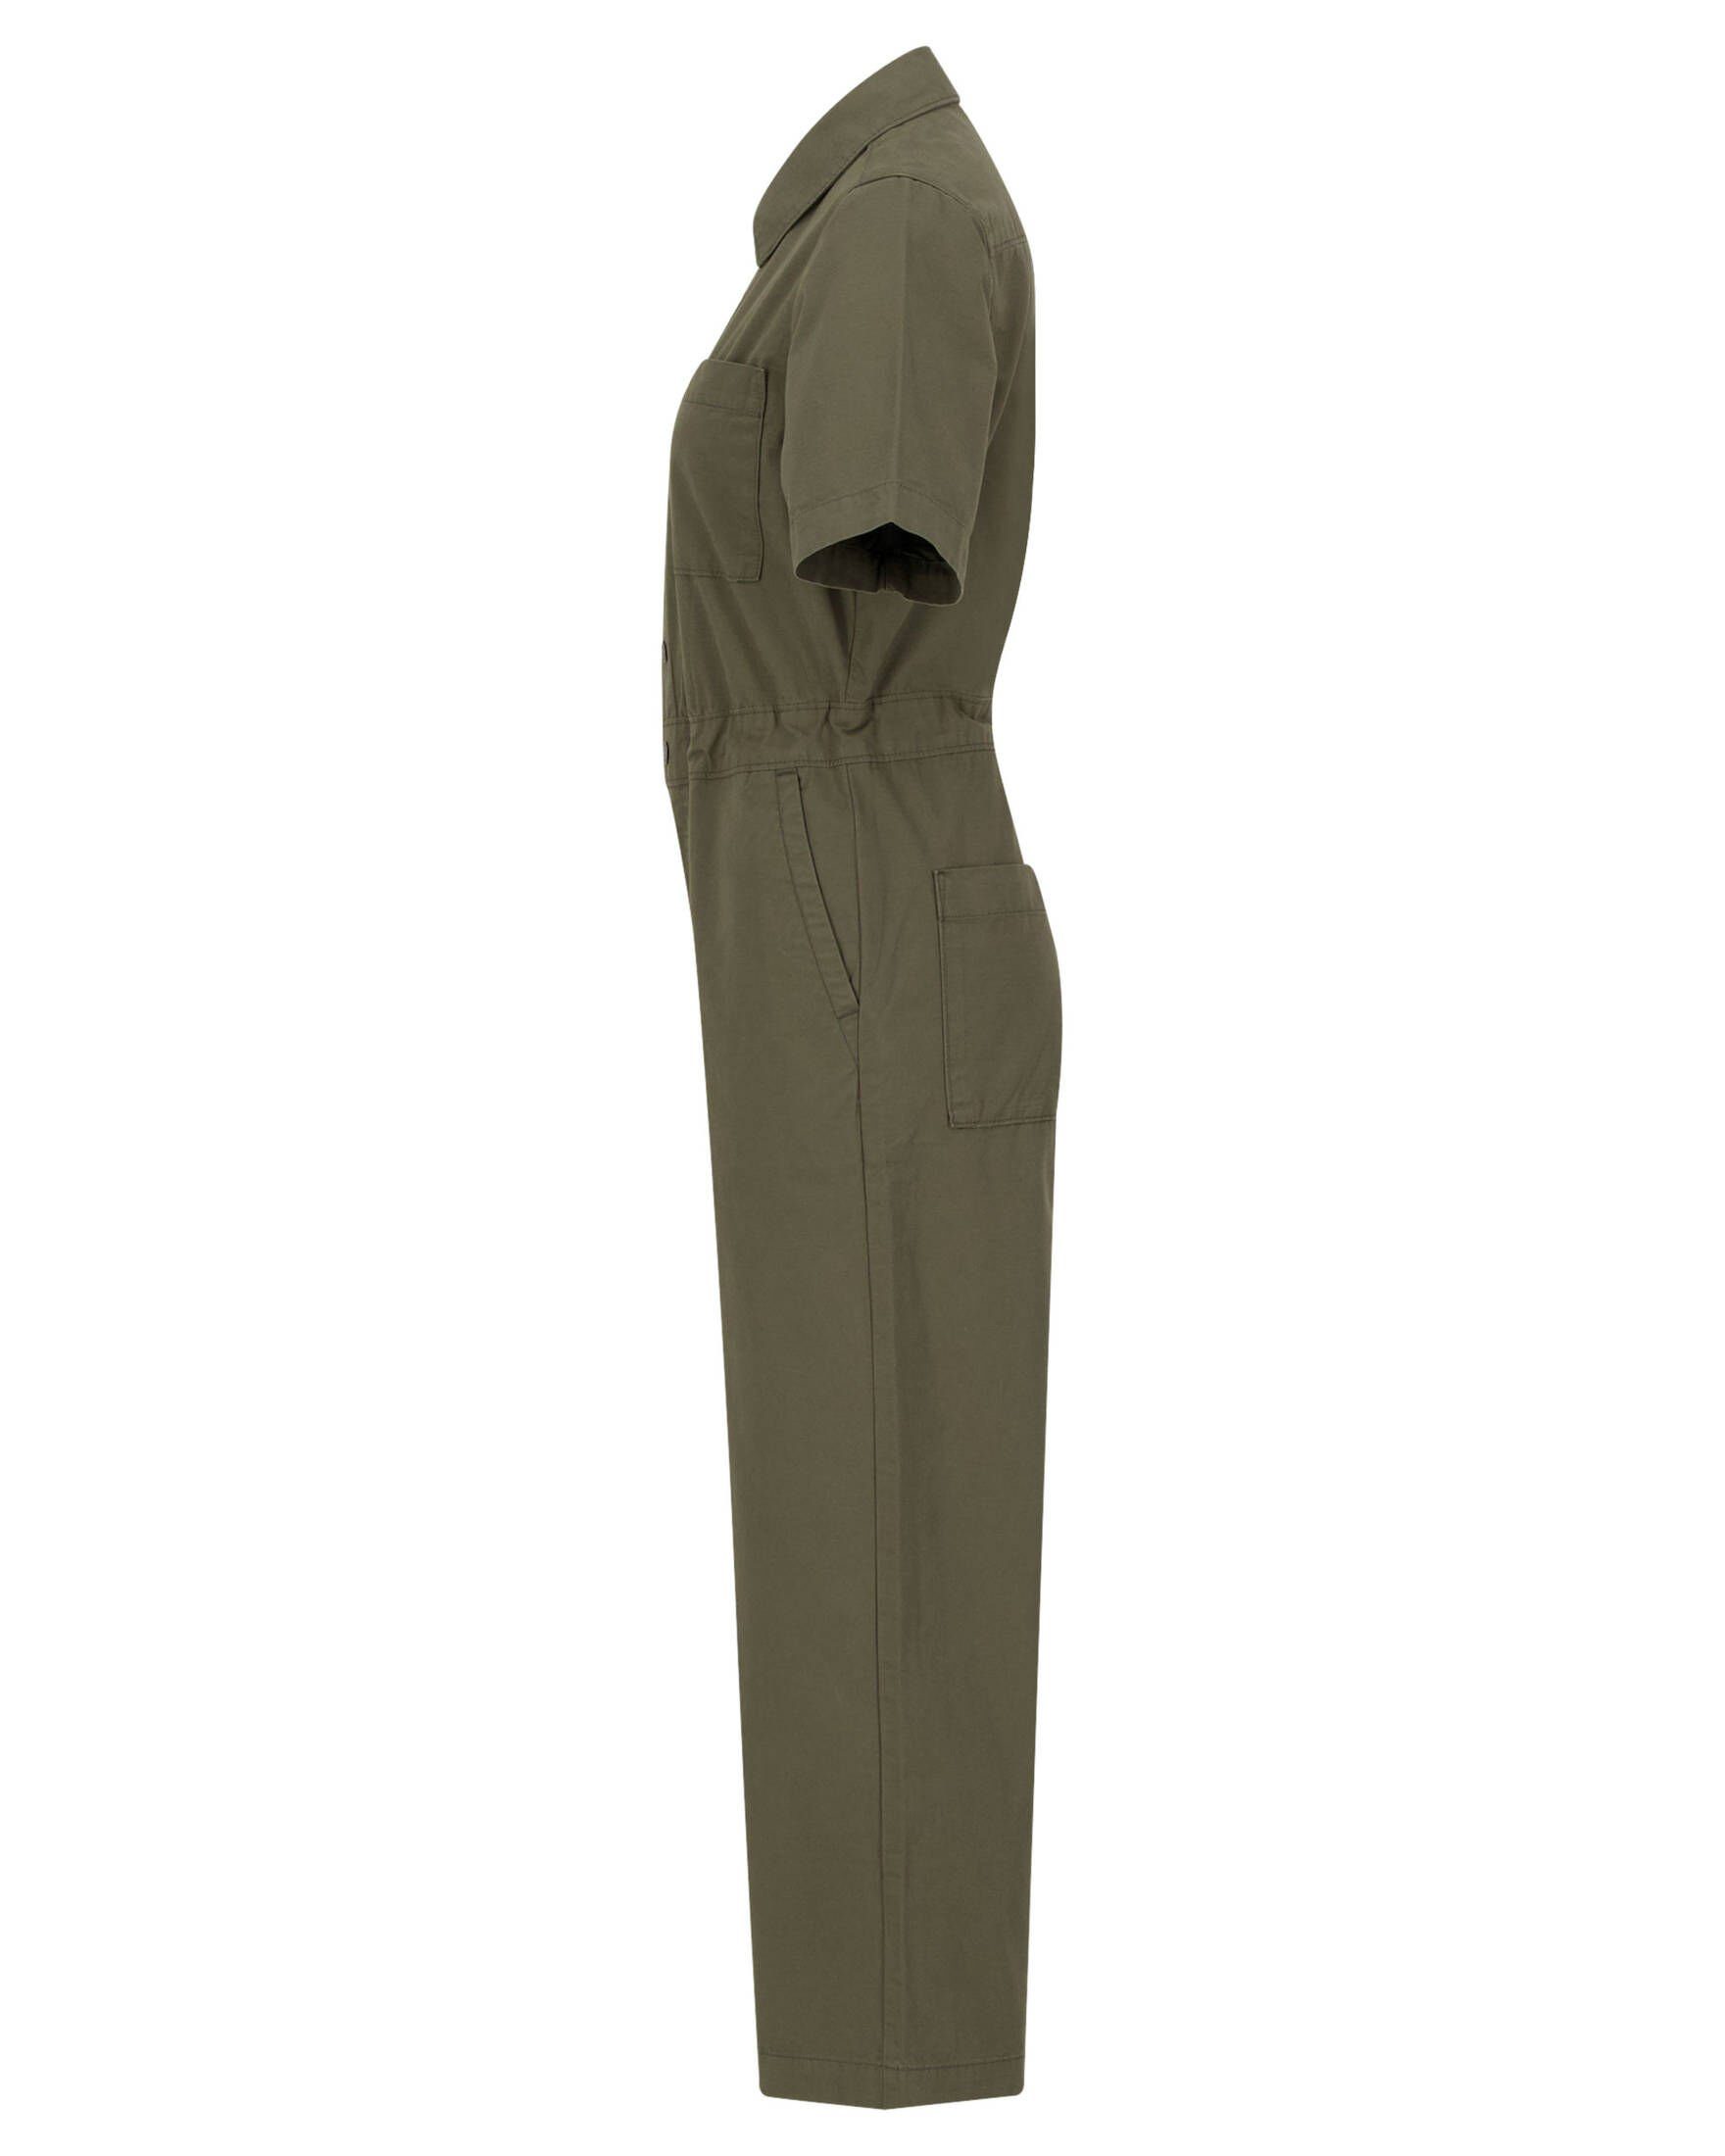 (1-tlg) GREEN BOILERSUIT Jumpsuit Overall Damen ARMY Levi's®